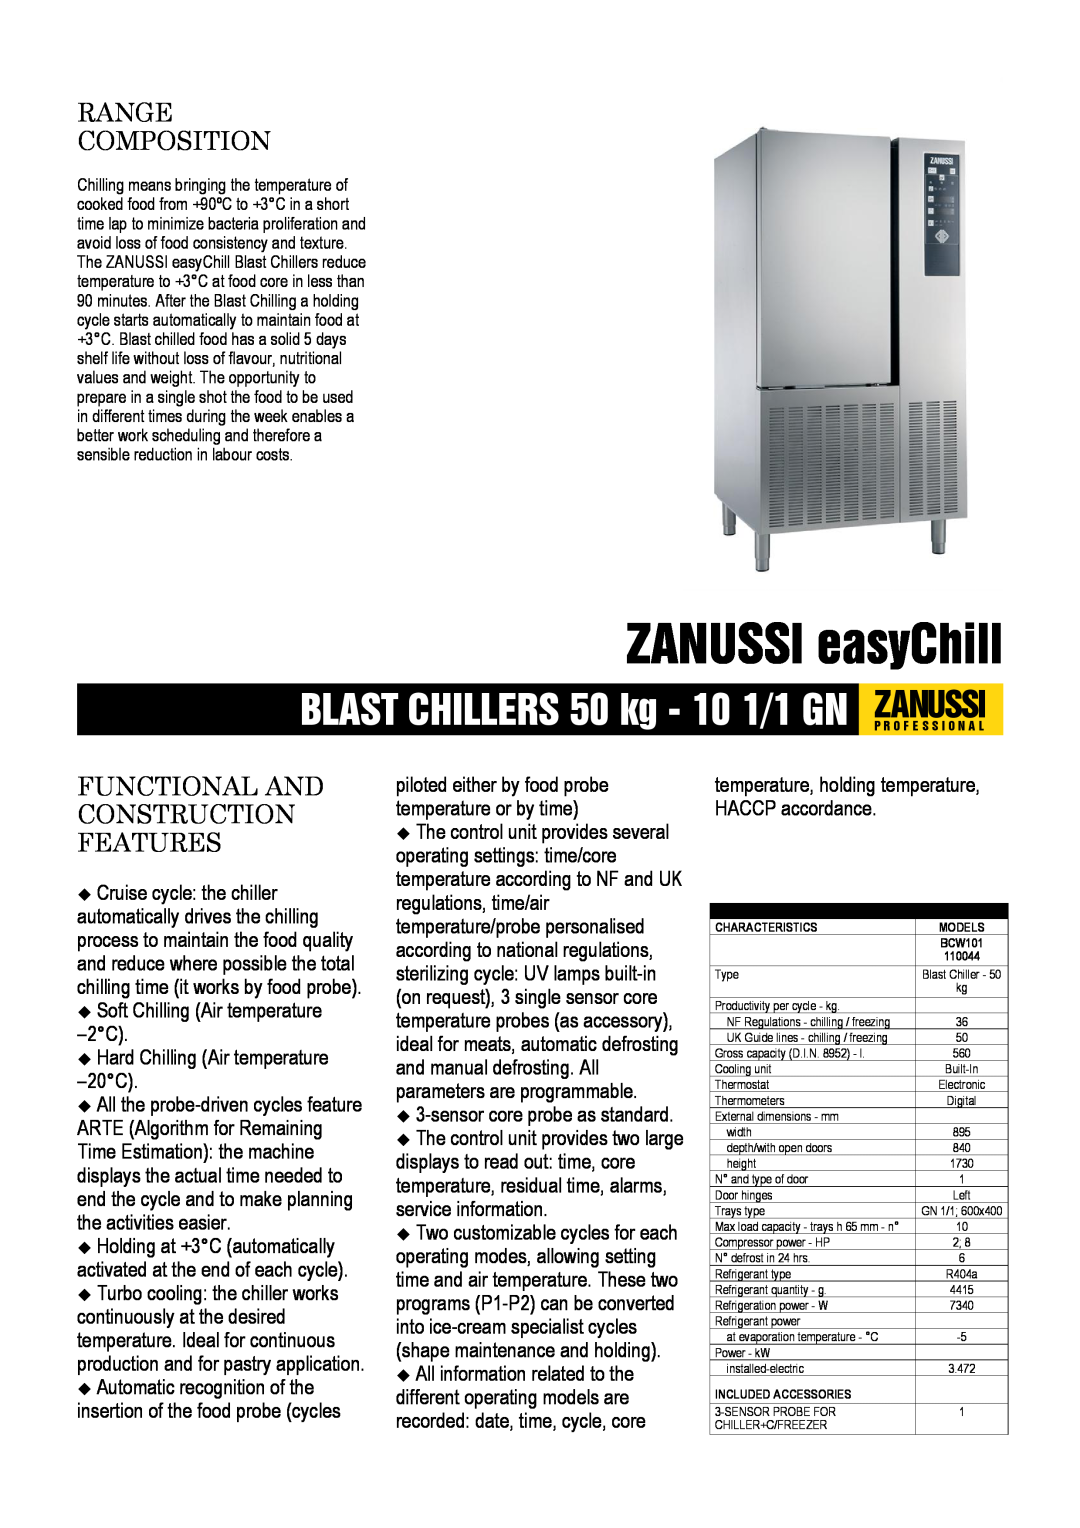 Zanussi 110044, BCW101 dimensions ZANUSSI easyChill, Range Composition, Functional And Construction Features 